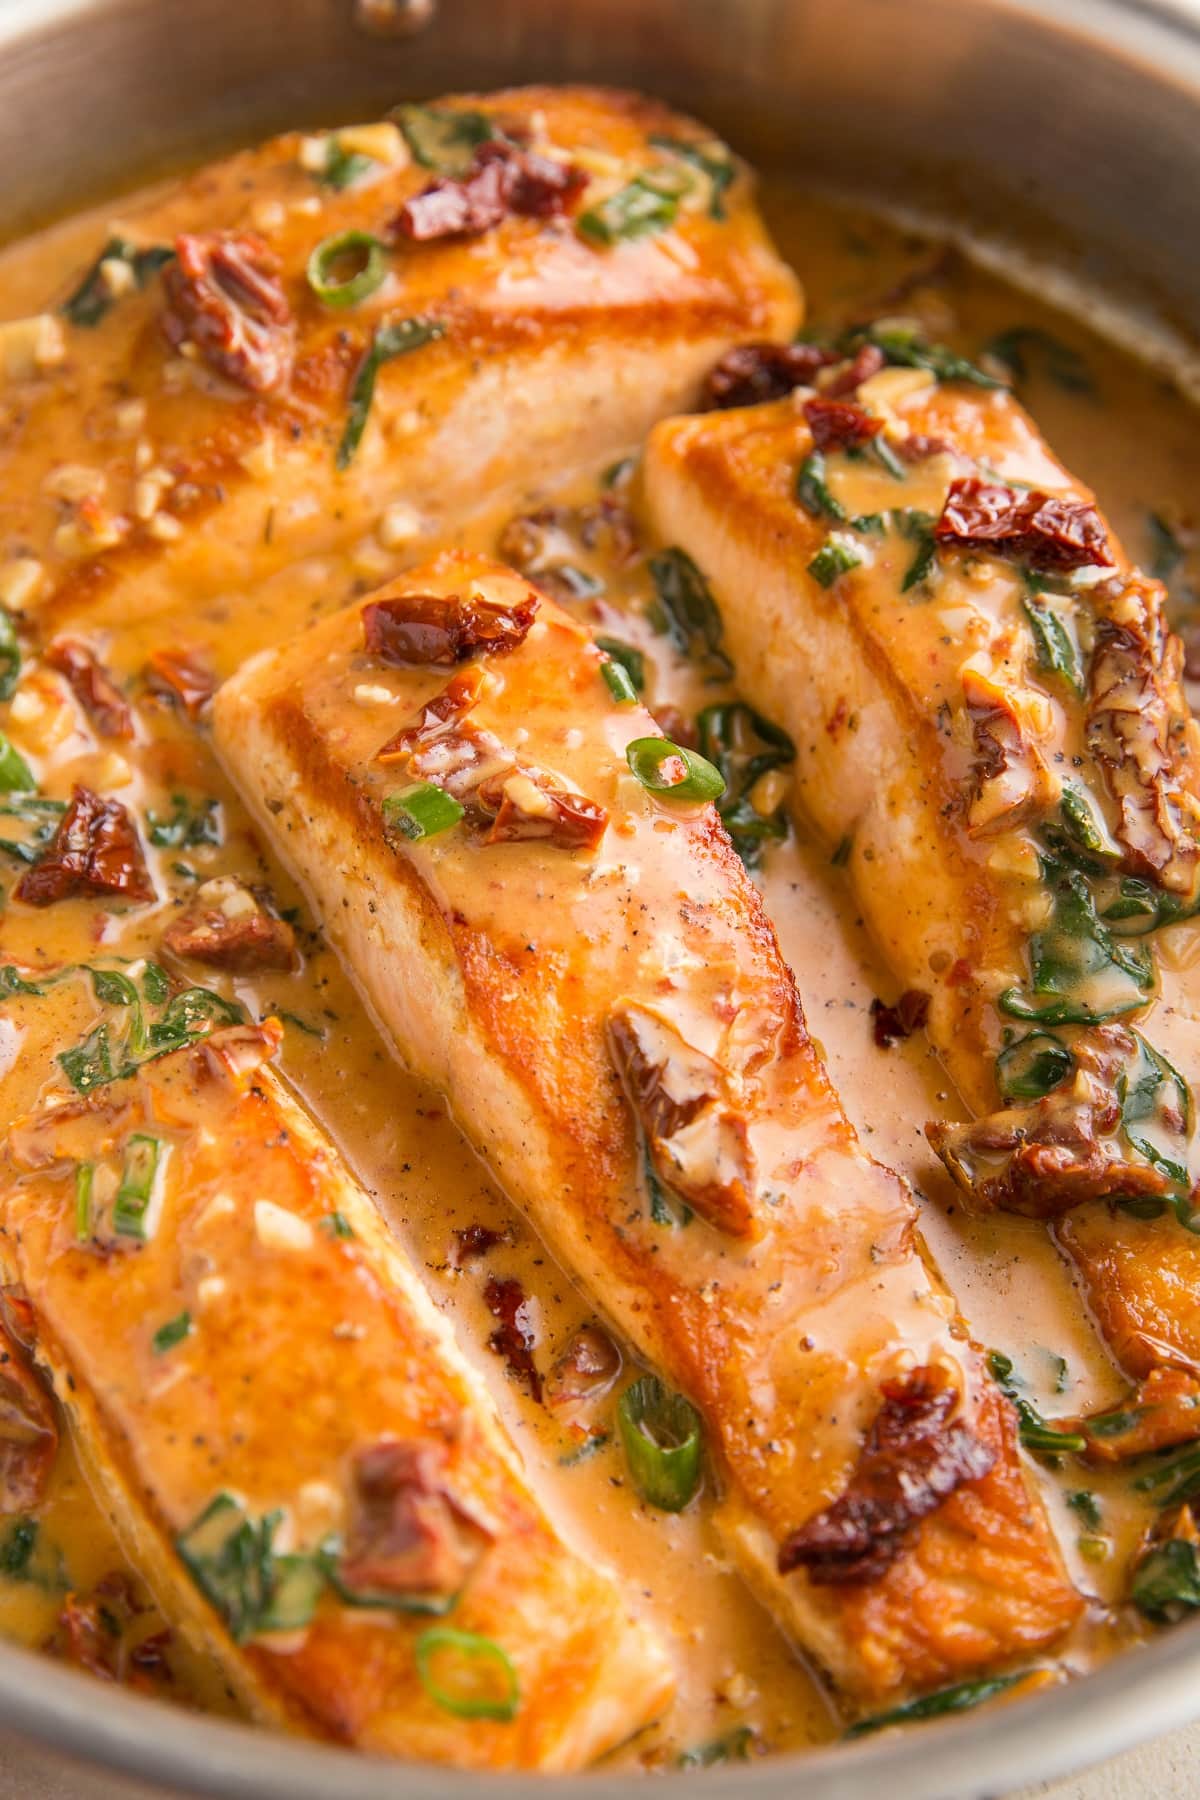 Creamy Sun Dried Tomato Salmon cooked in a large skillet - one of the recipes for this week's healthy weekly meal plan